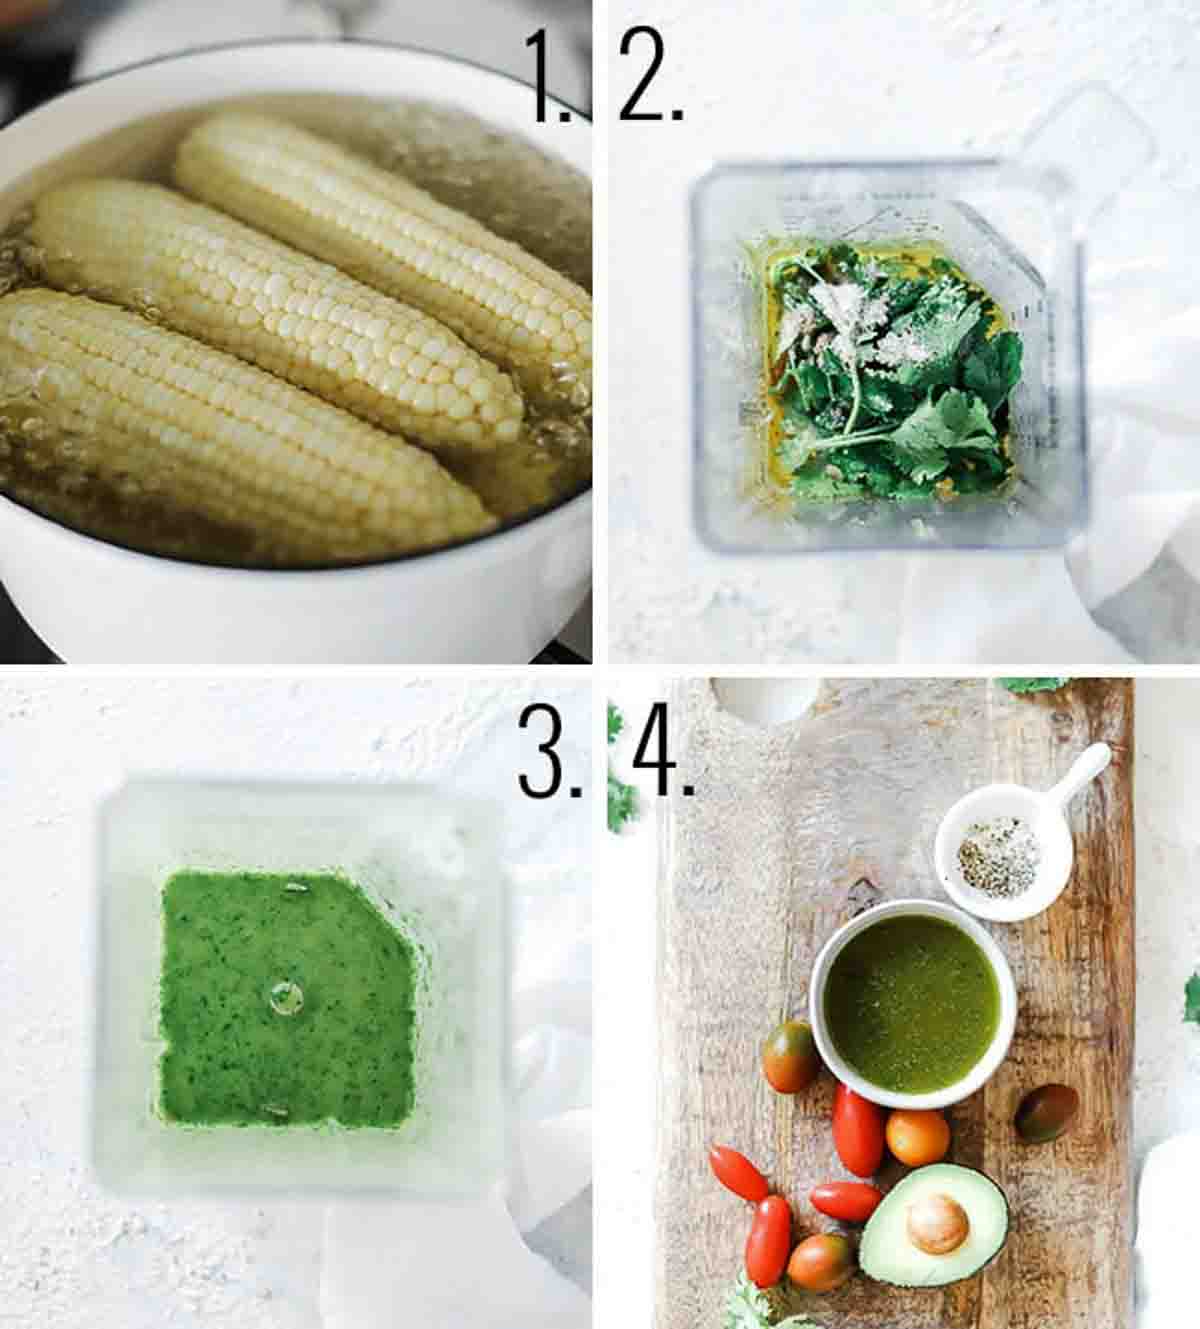 A collage showing the steps to make corn salad including boiling the corn and preparing the dressing.